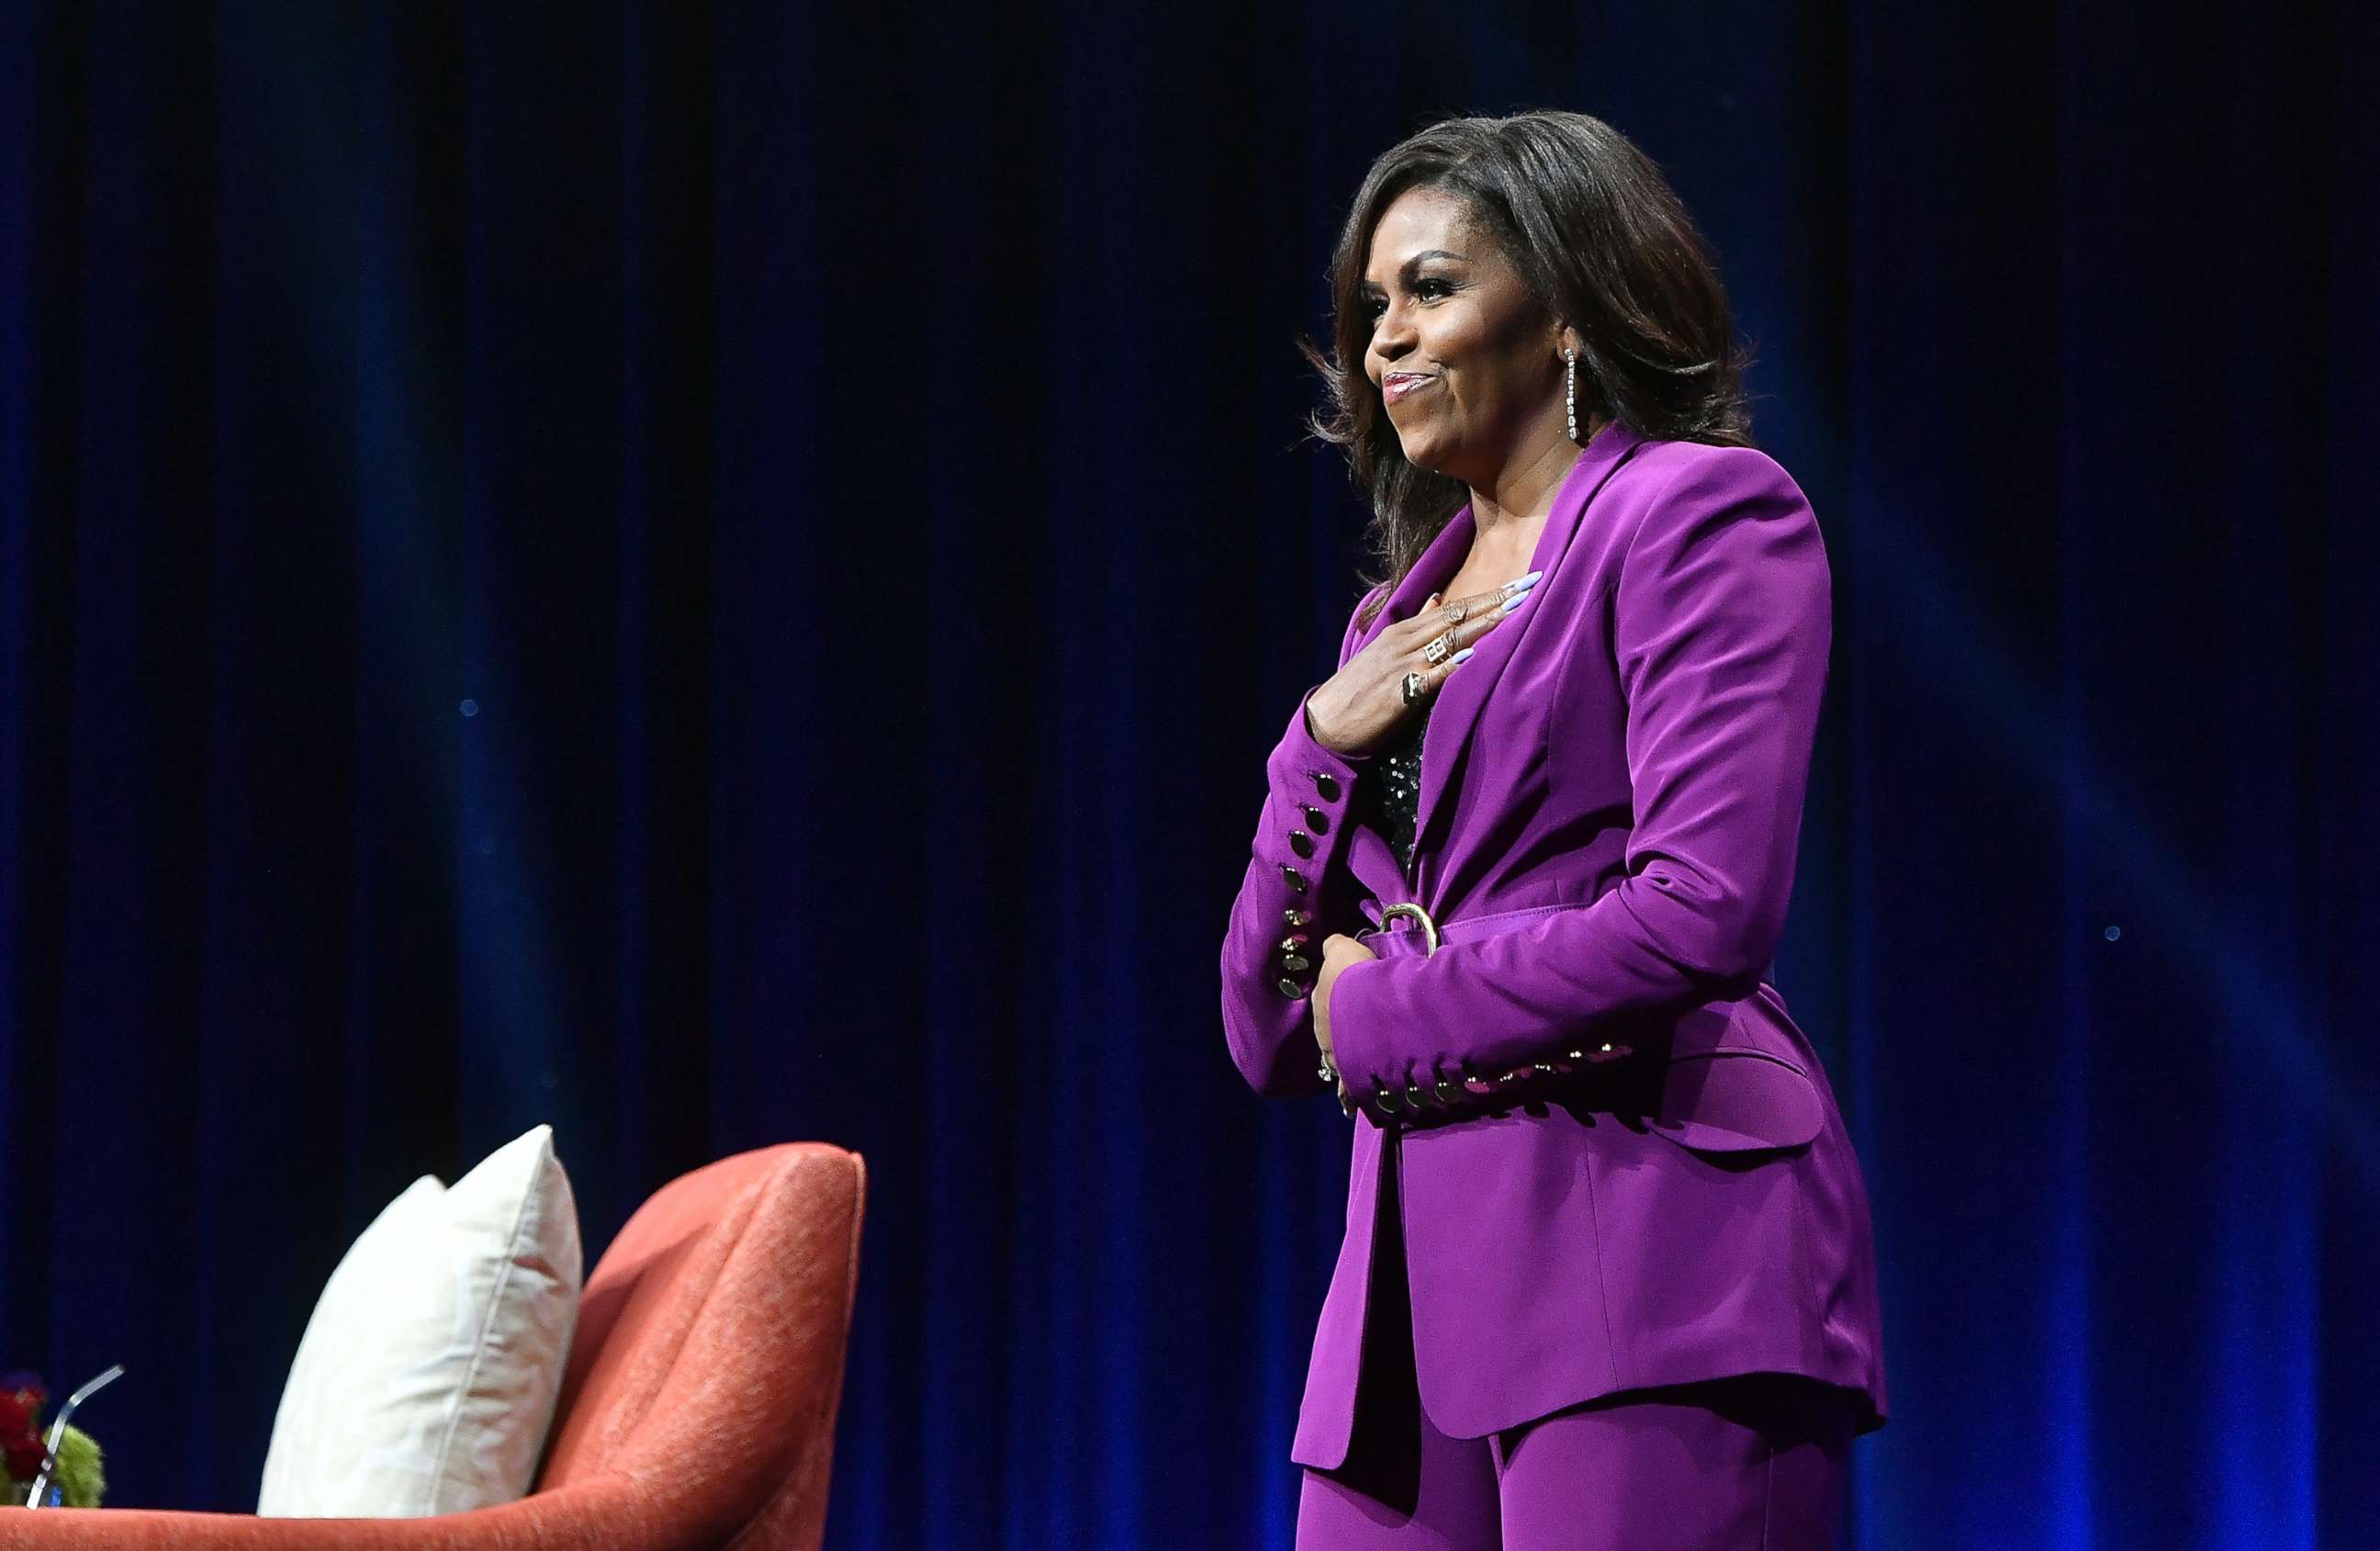 PHOTO: Former First Lady Michelle Obama appears at an event, May 11, 2019 in Atlanta, Ga.